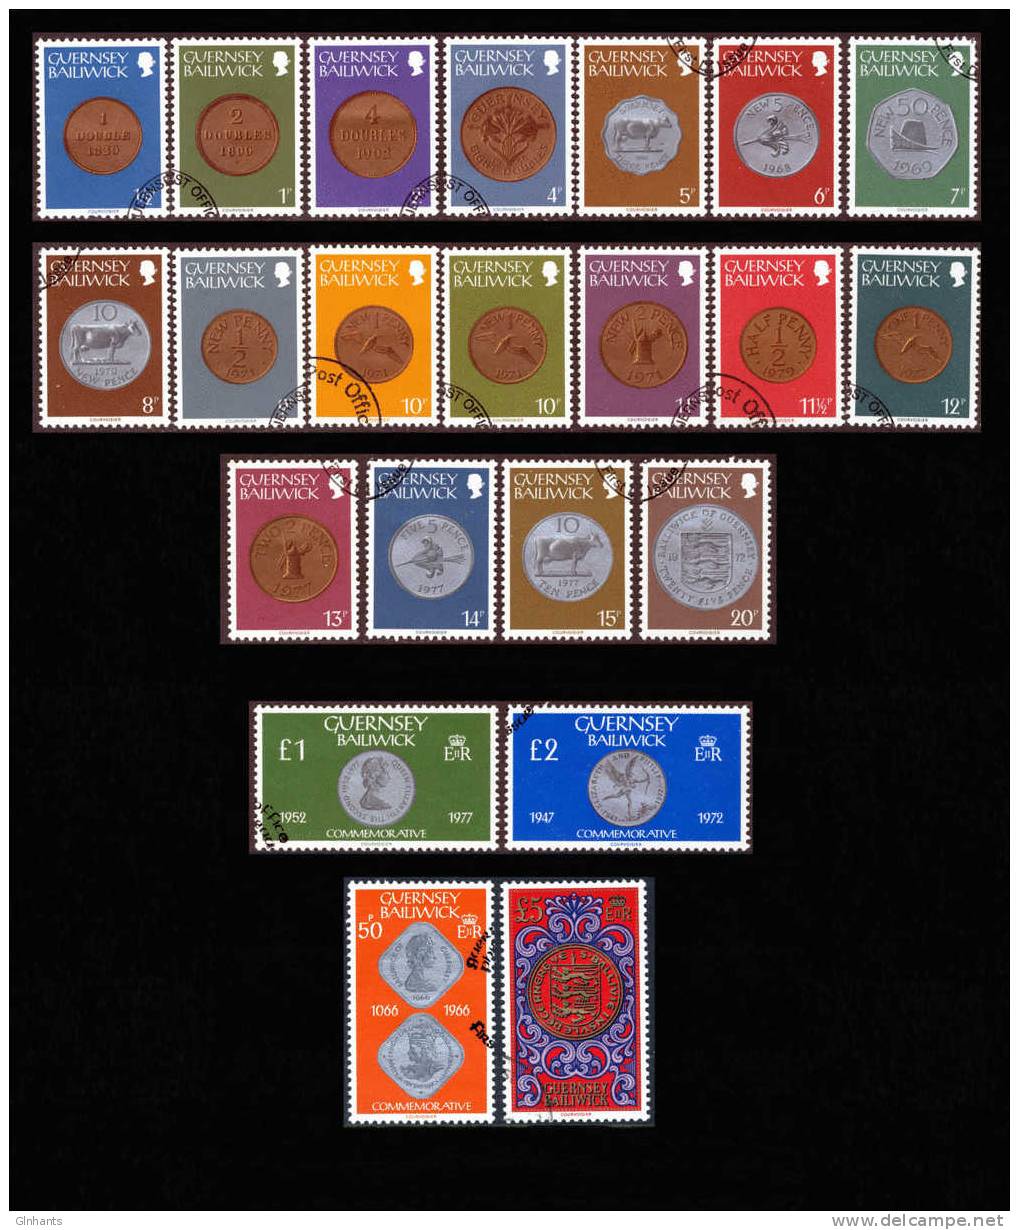 GUERNSEY - 1979 COINS ON STAMPS SET COMPLETE TO £5 (22V) FINE USED - Coins